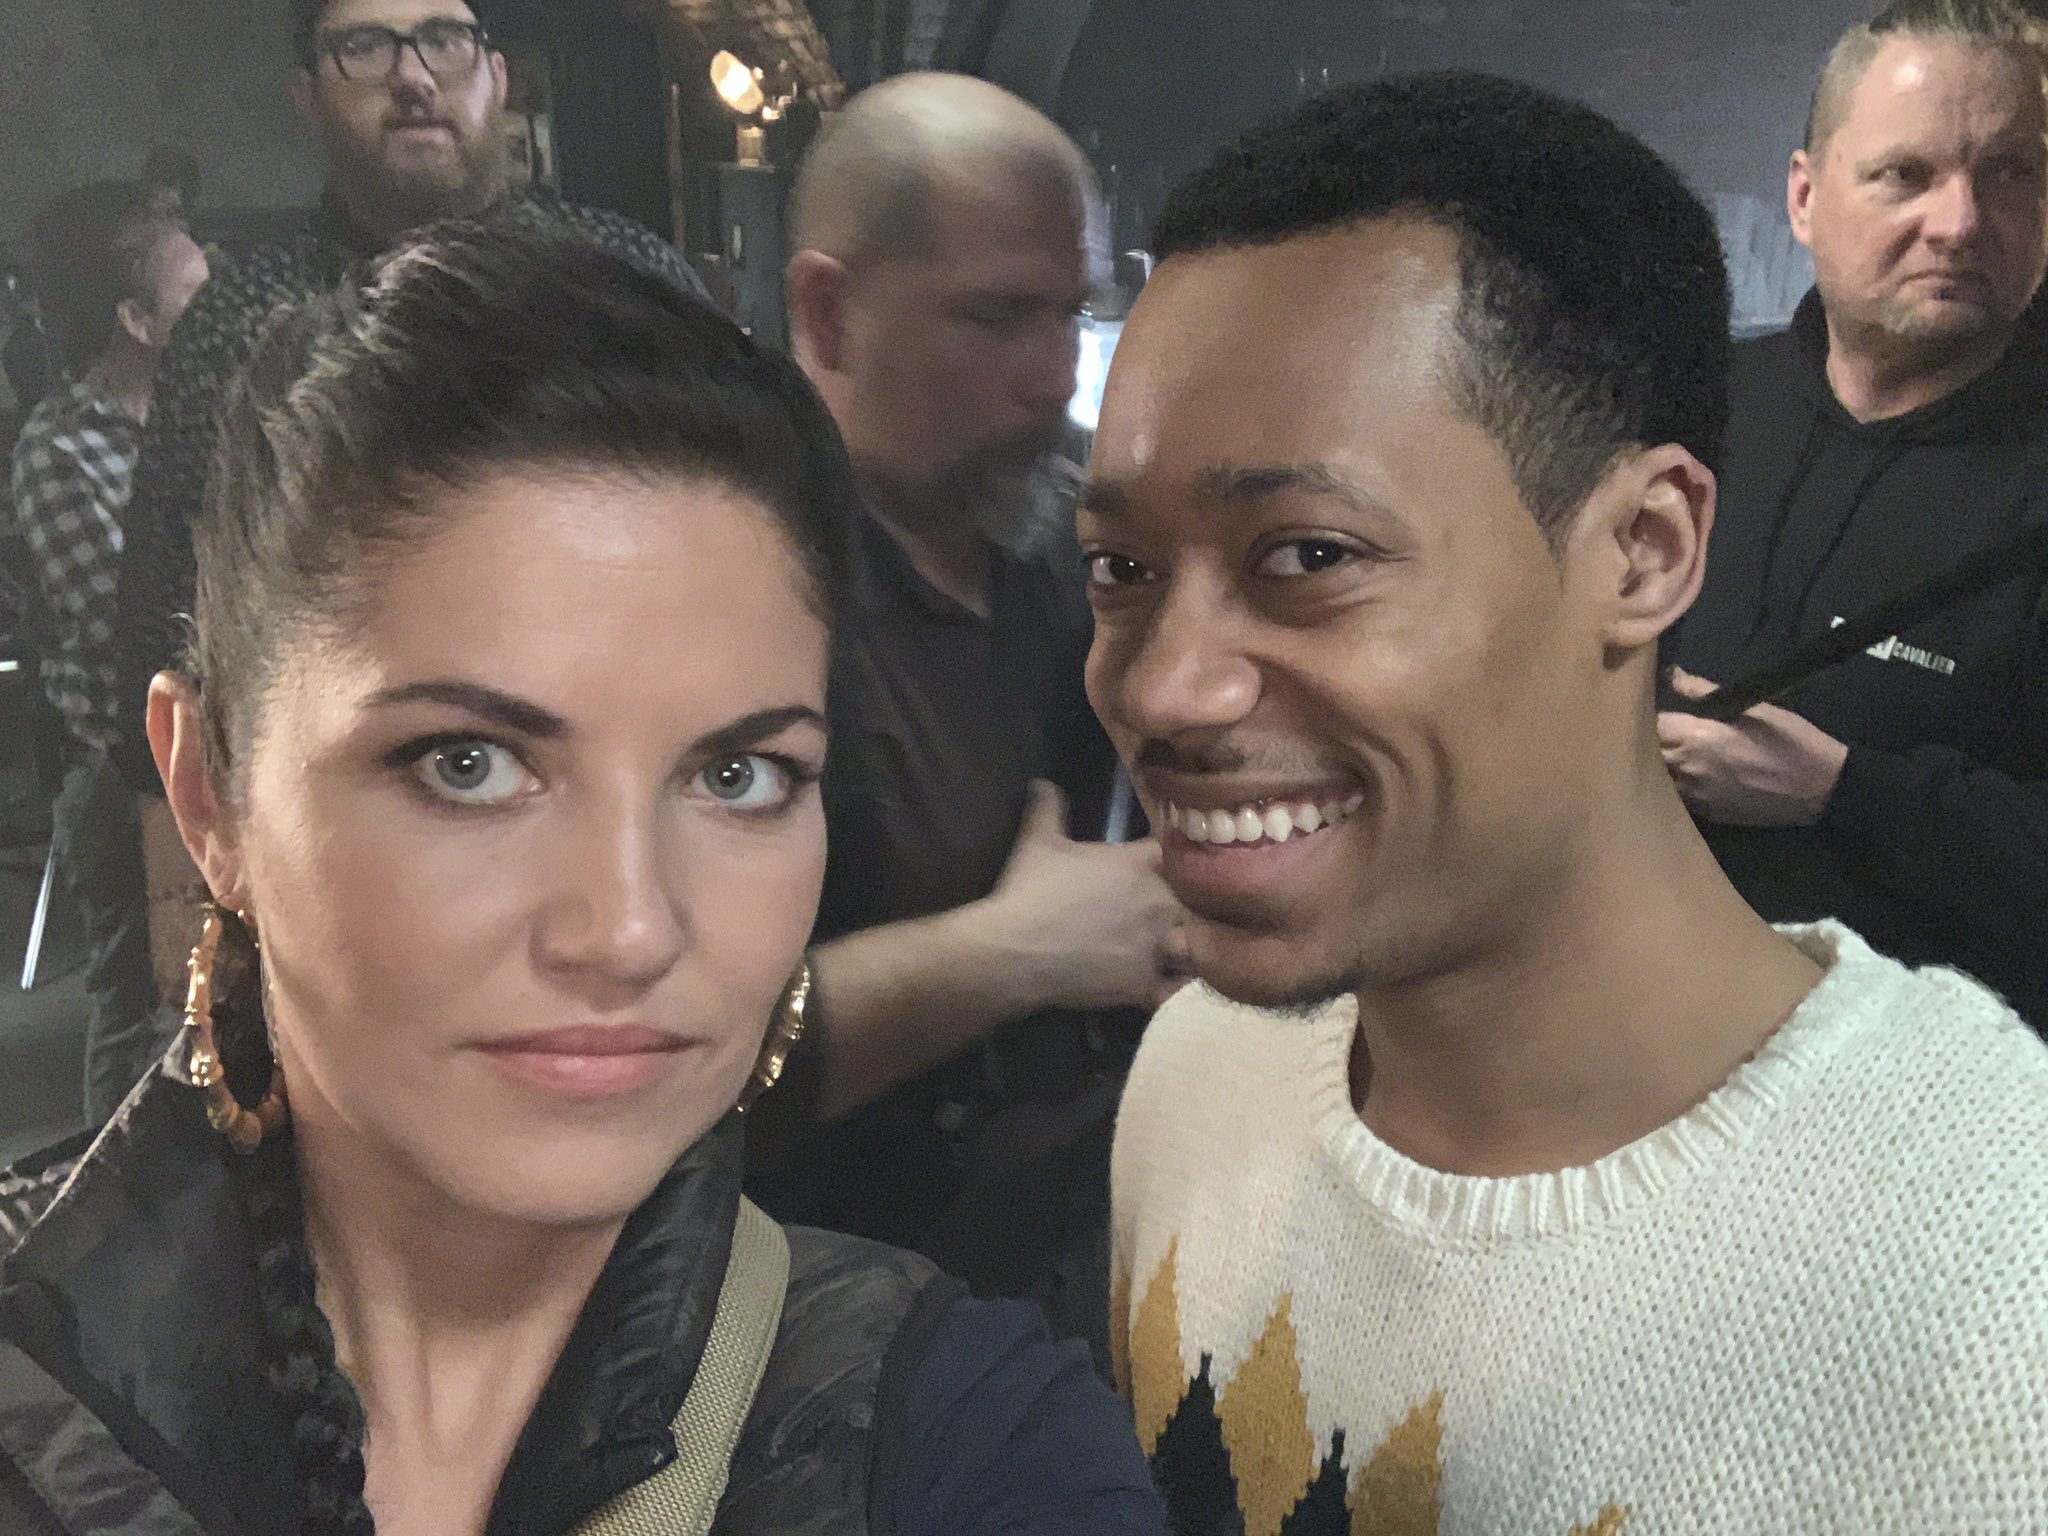 Marika dominczyk on last pic of tina amp standish this was right after tina punched him in the stomach ððð tylerjameswill whiskeycav savewhiskeycavalier whiskeycavailer httpstcoafnxmofzg